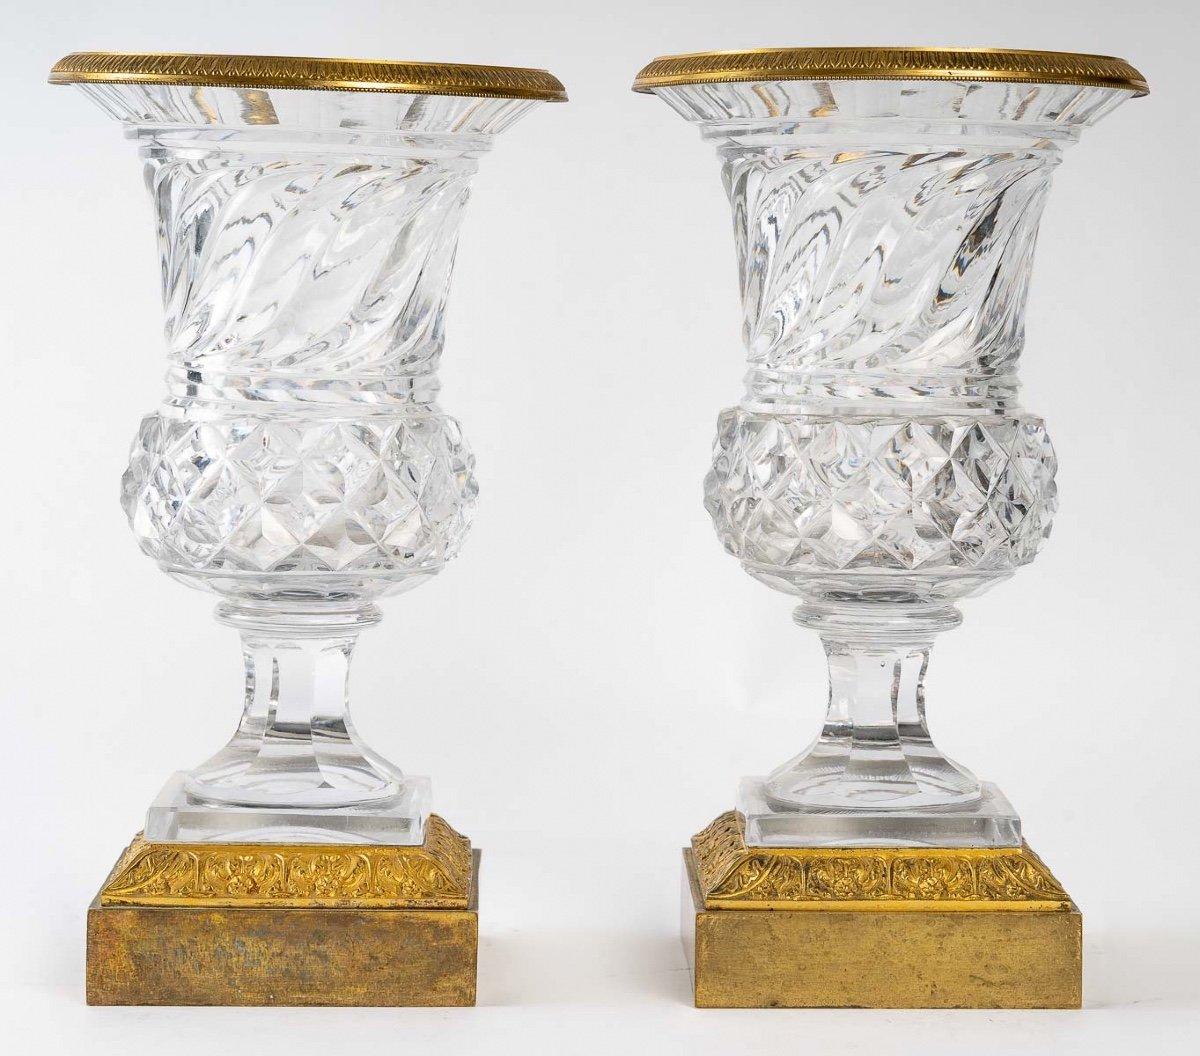 A pair of crystal and gilt bronze vases, Napoleon III period, late 19th century.
Measures: Width : 17 cm
Diameter : 12 cm
Height : 30 cm.